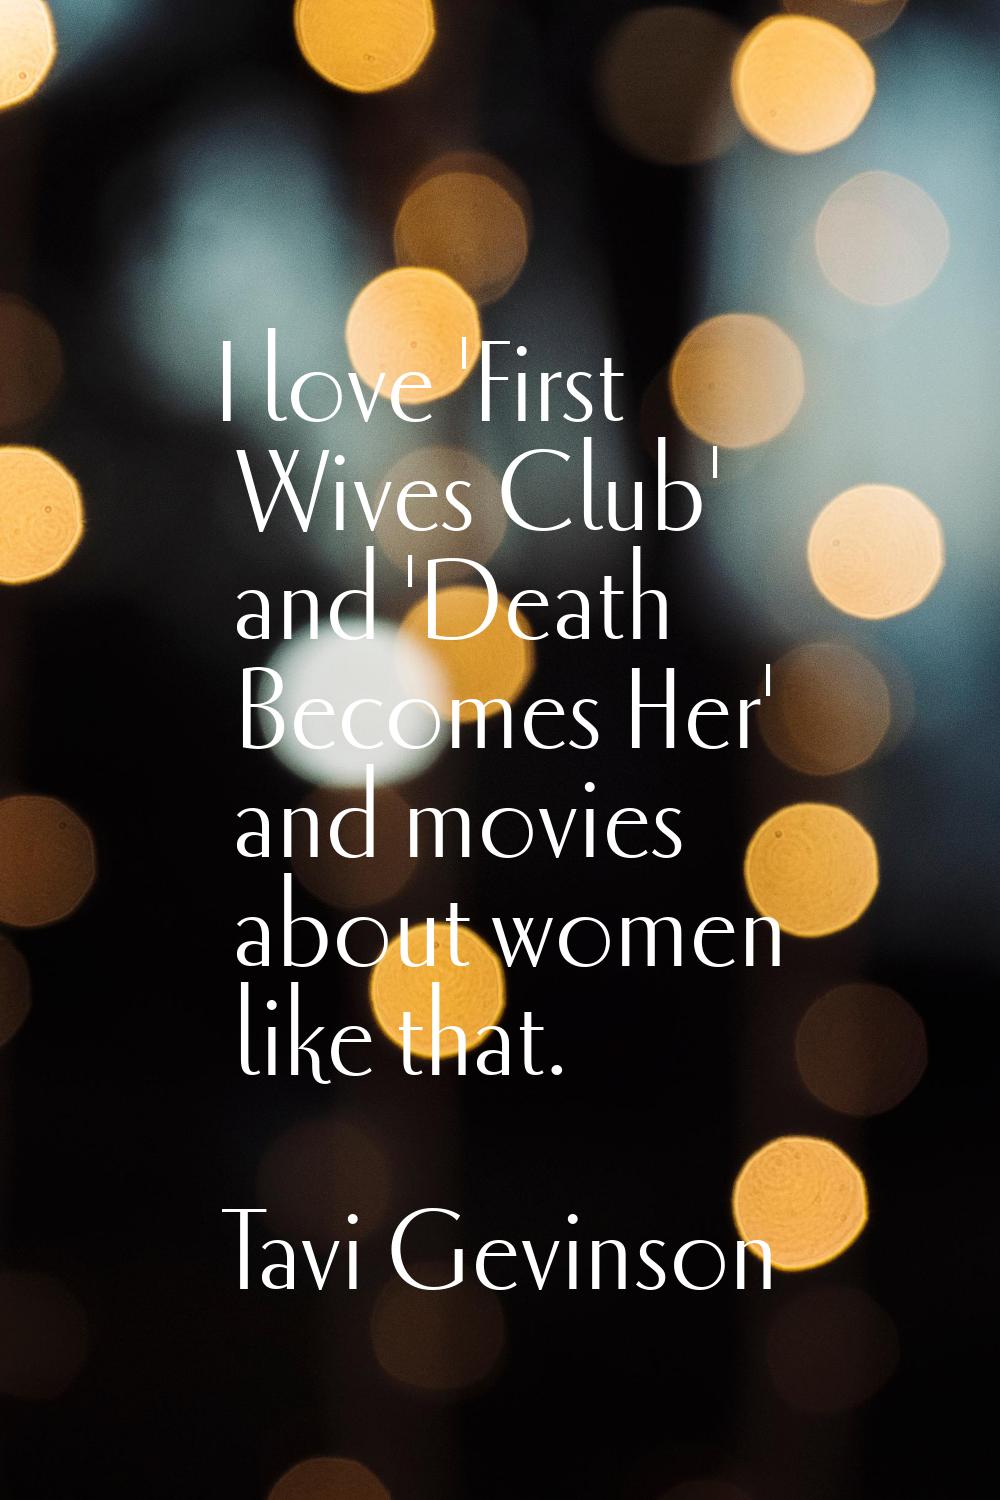 I love 'First Wives Club' and 'Death Becomes Her' and movies about women like that.